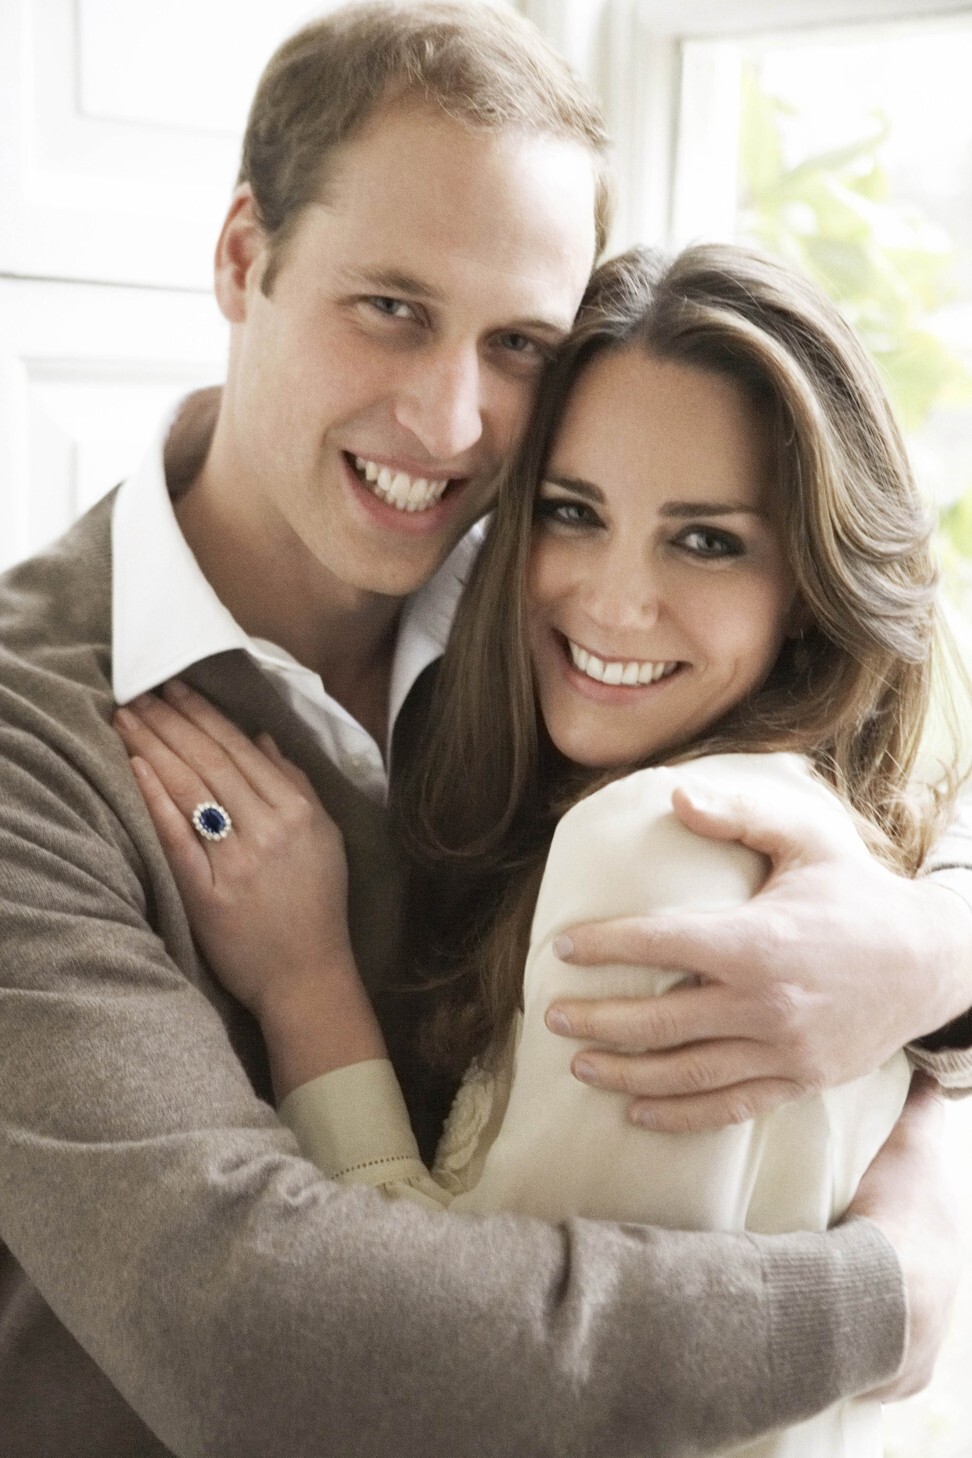 William and Kate, who is wearing the sapphire ring in their engagement photo. Photo: AFP